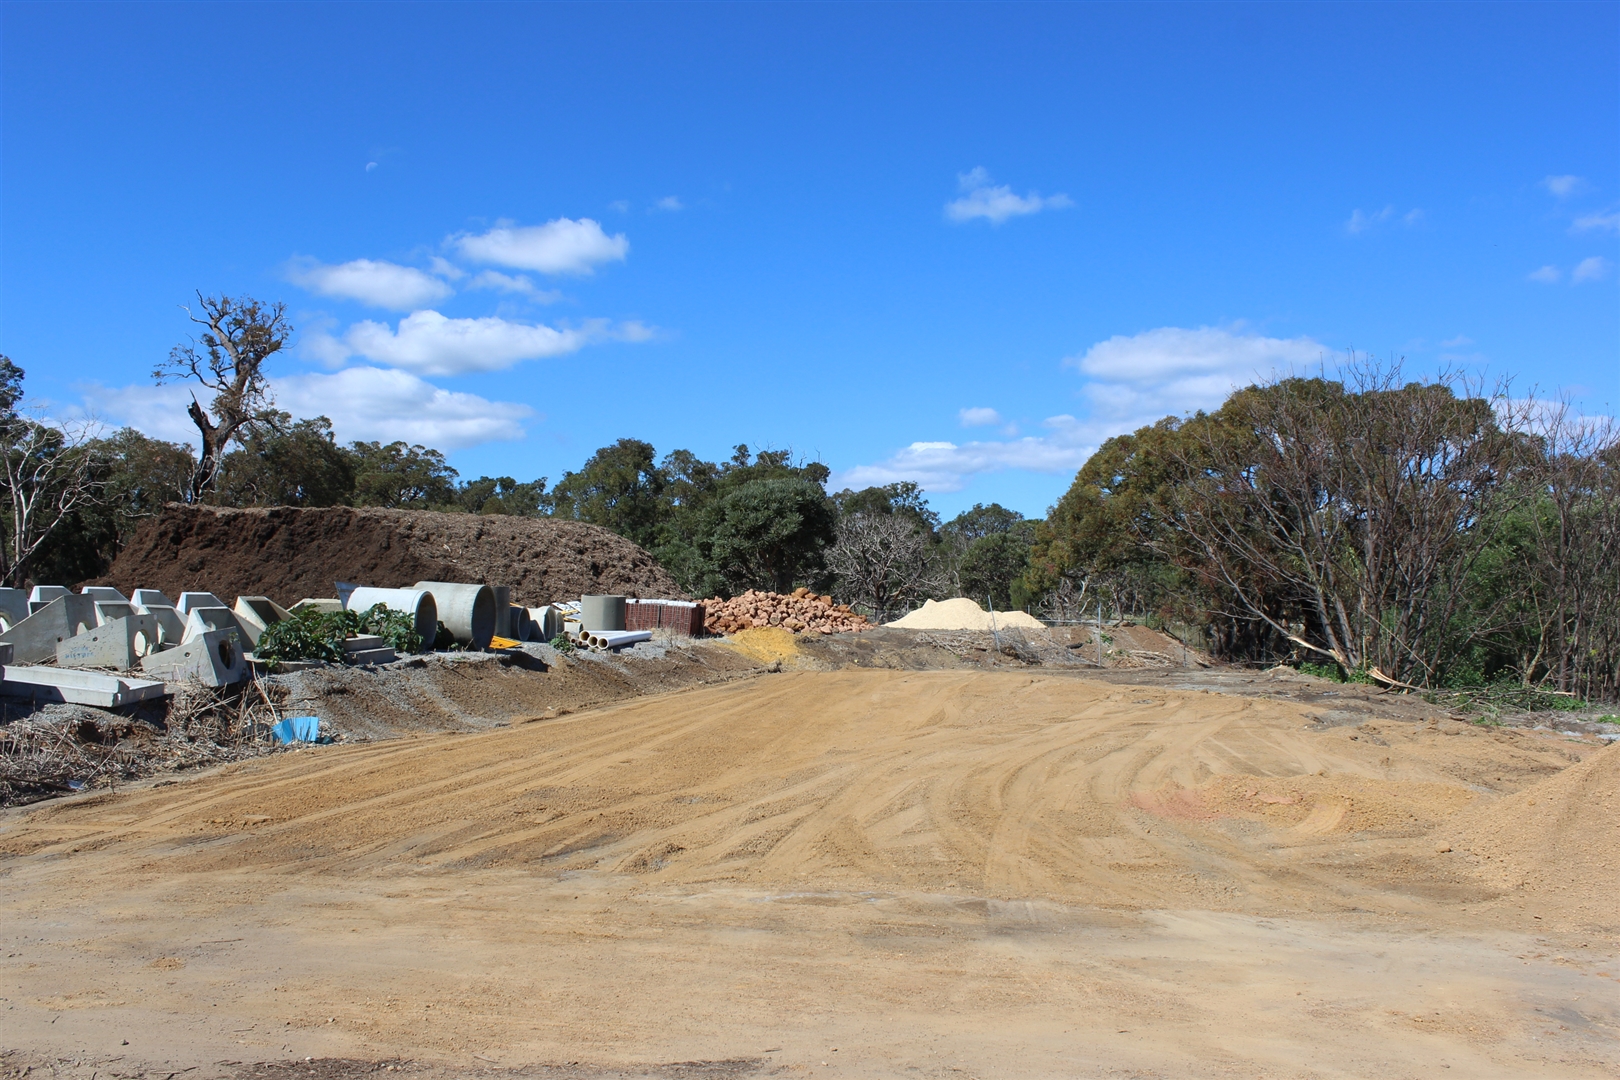 Media Library - Waste Transfer Station - August 2020